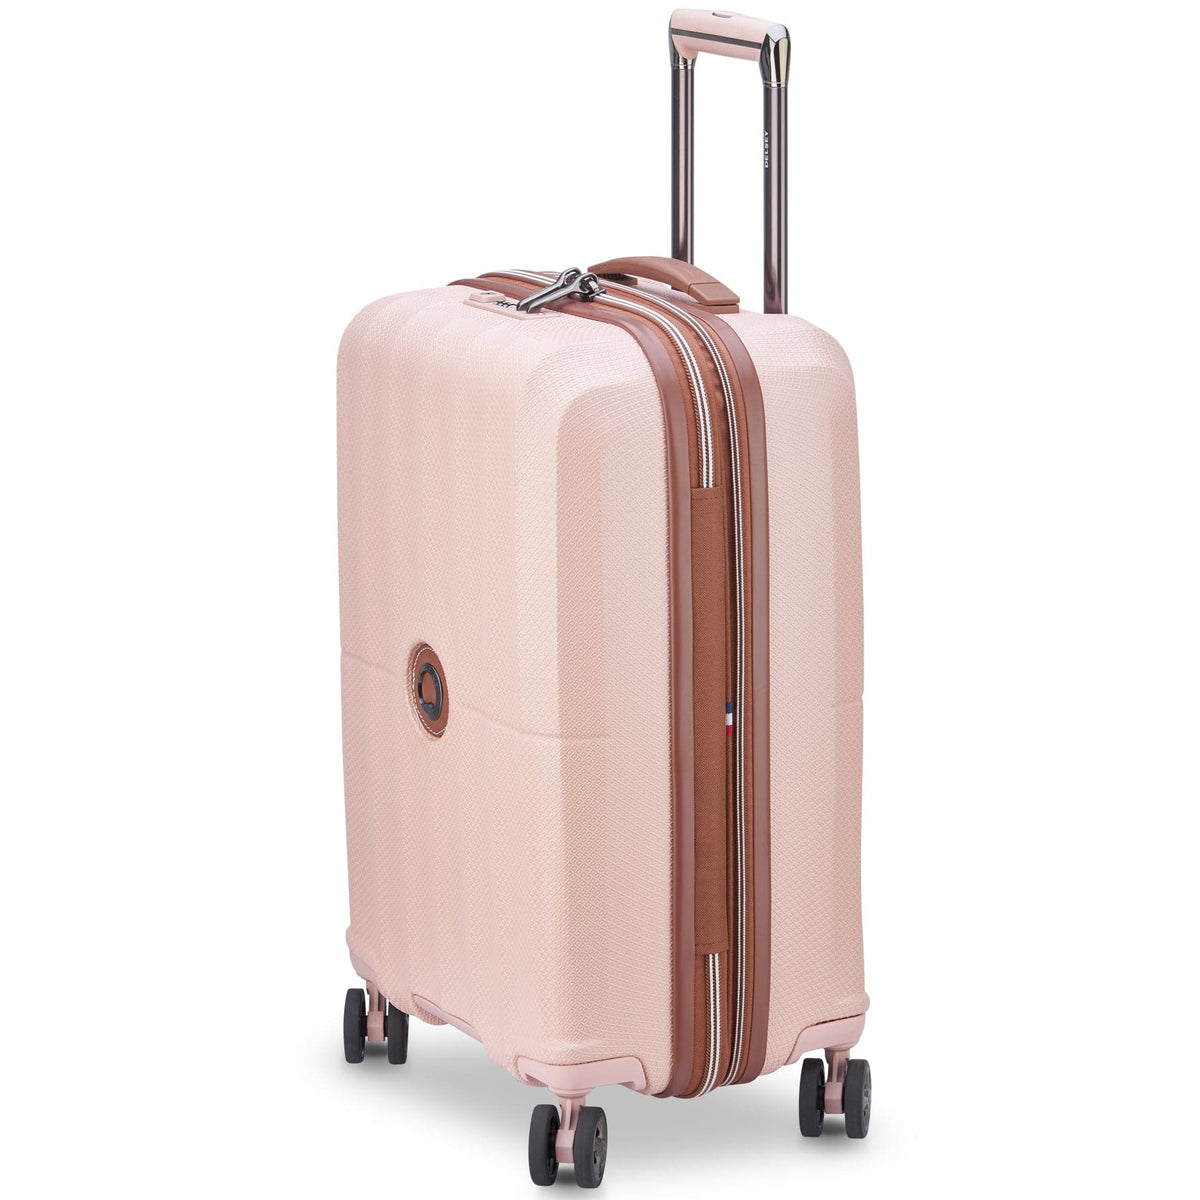 Delsey ST. Tropez Carry-On - 21" Small